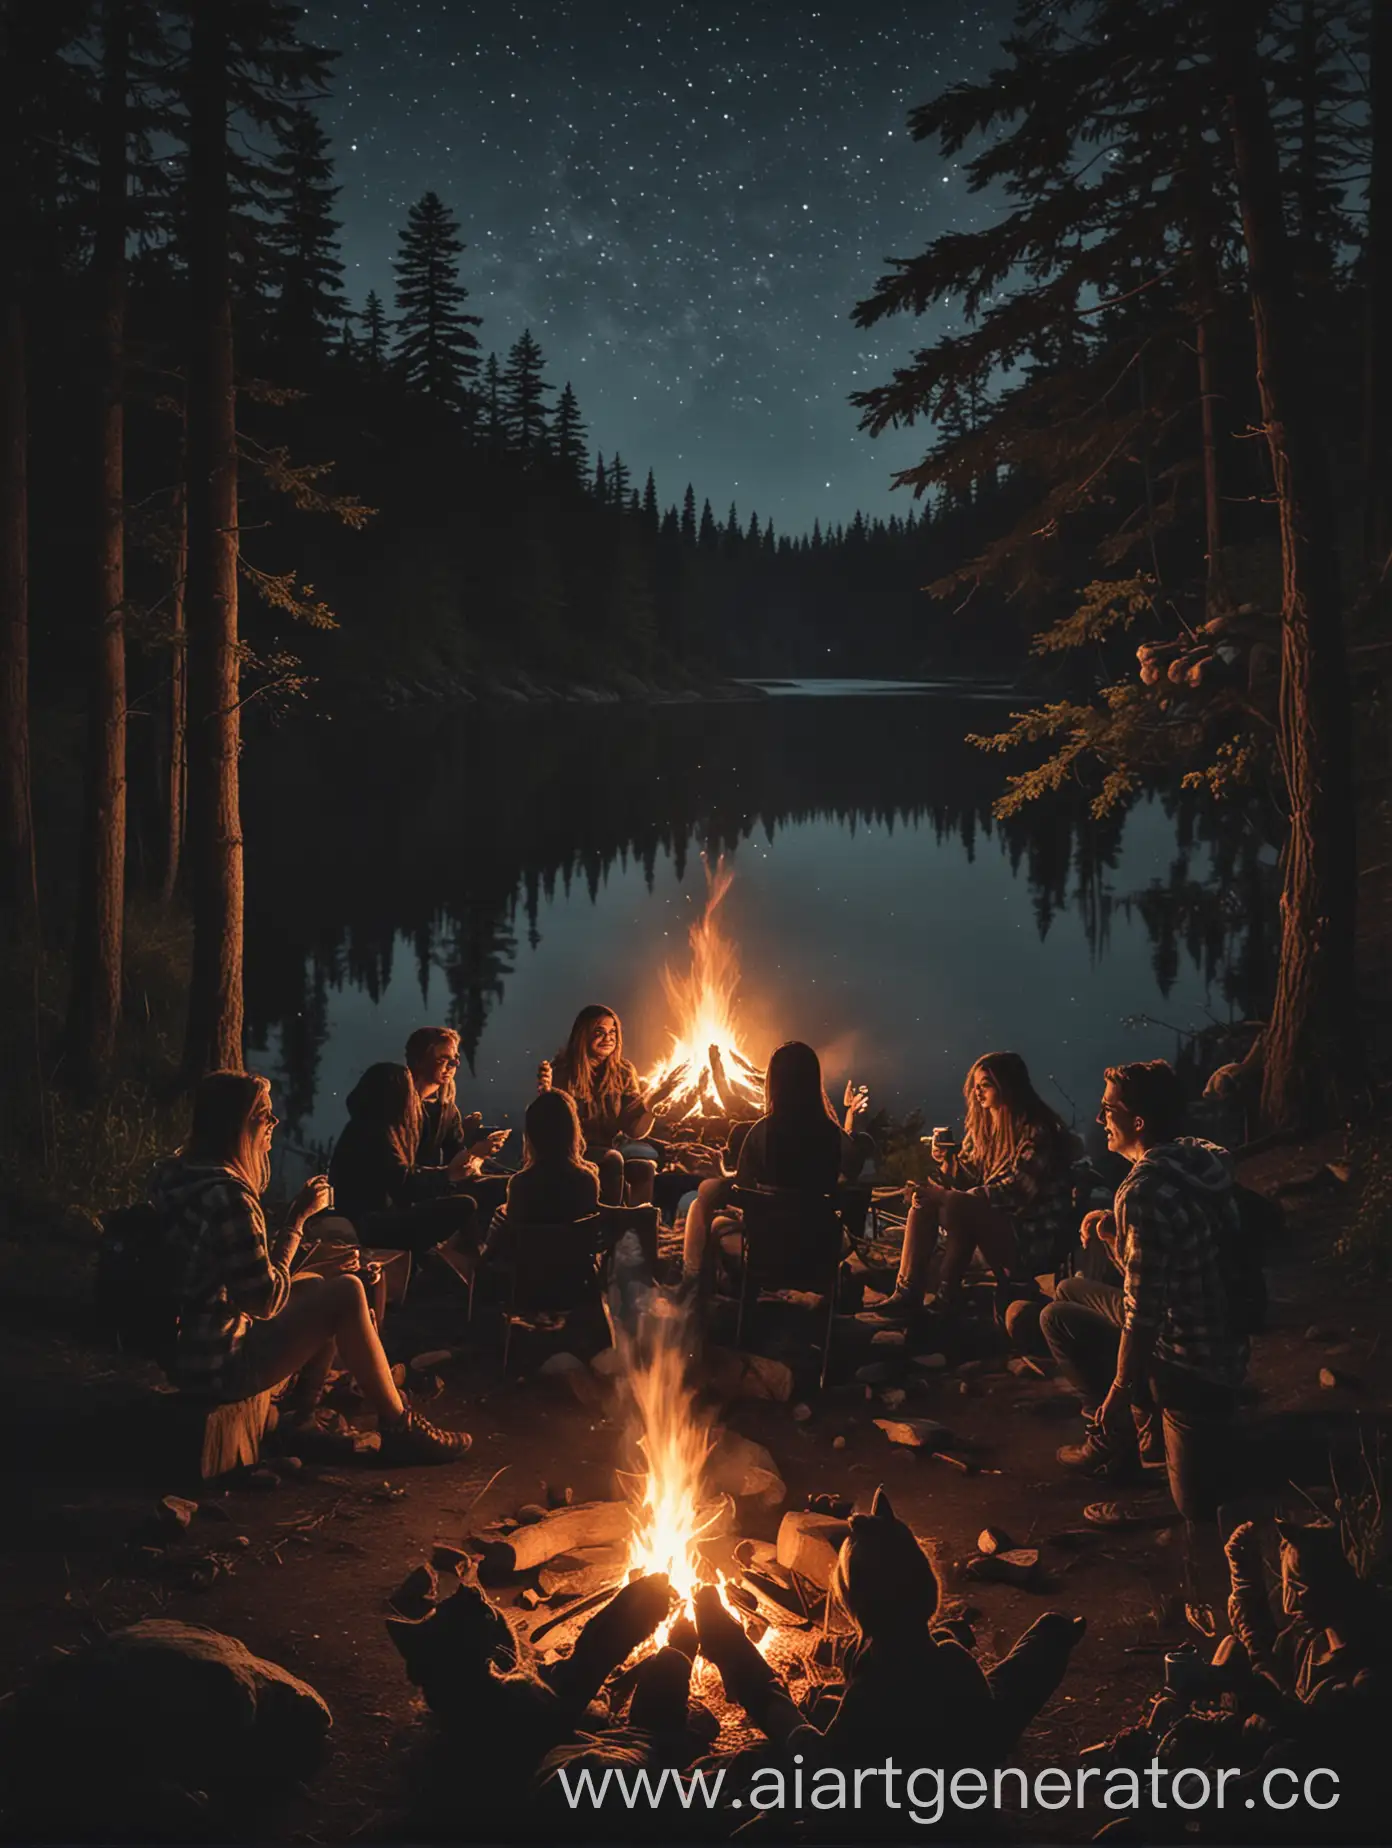 Nighttime-Campfire-Gathering-by-the-Lake-with-Friends-and-a-Black-Cat